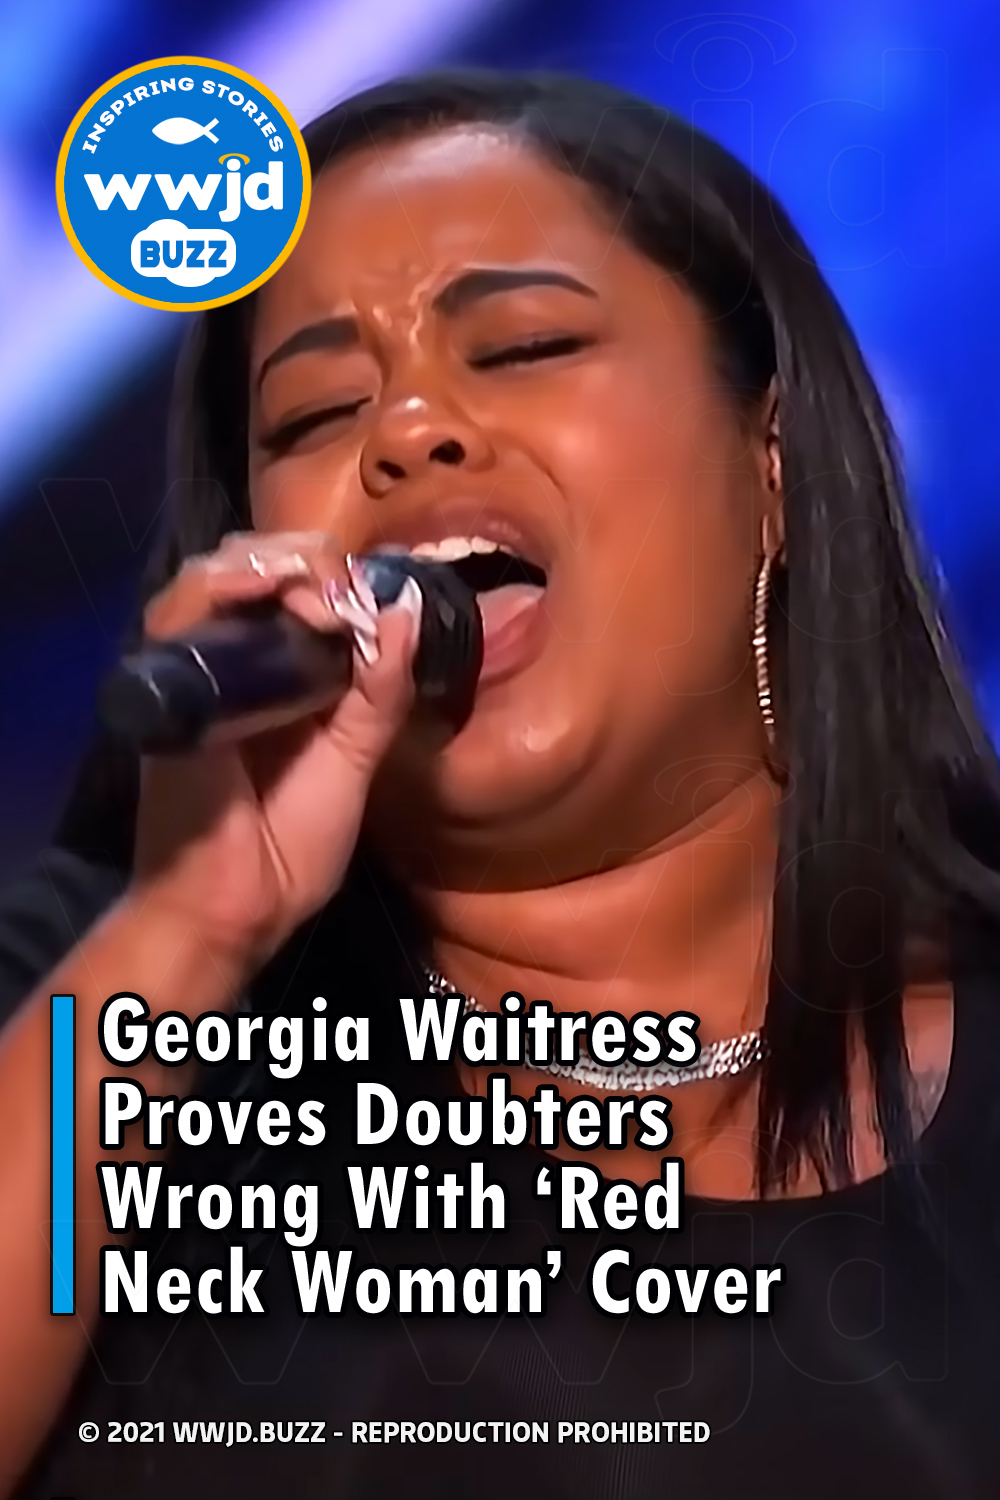 Georgia Waitress Proves Doubters Wrong With ‘Red Neck Woman’ Cover